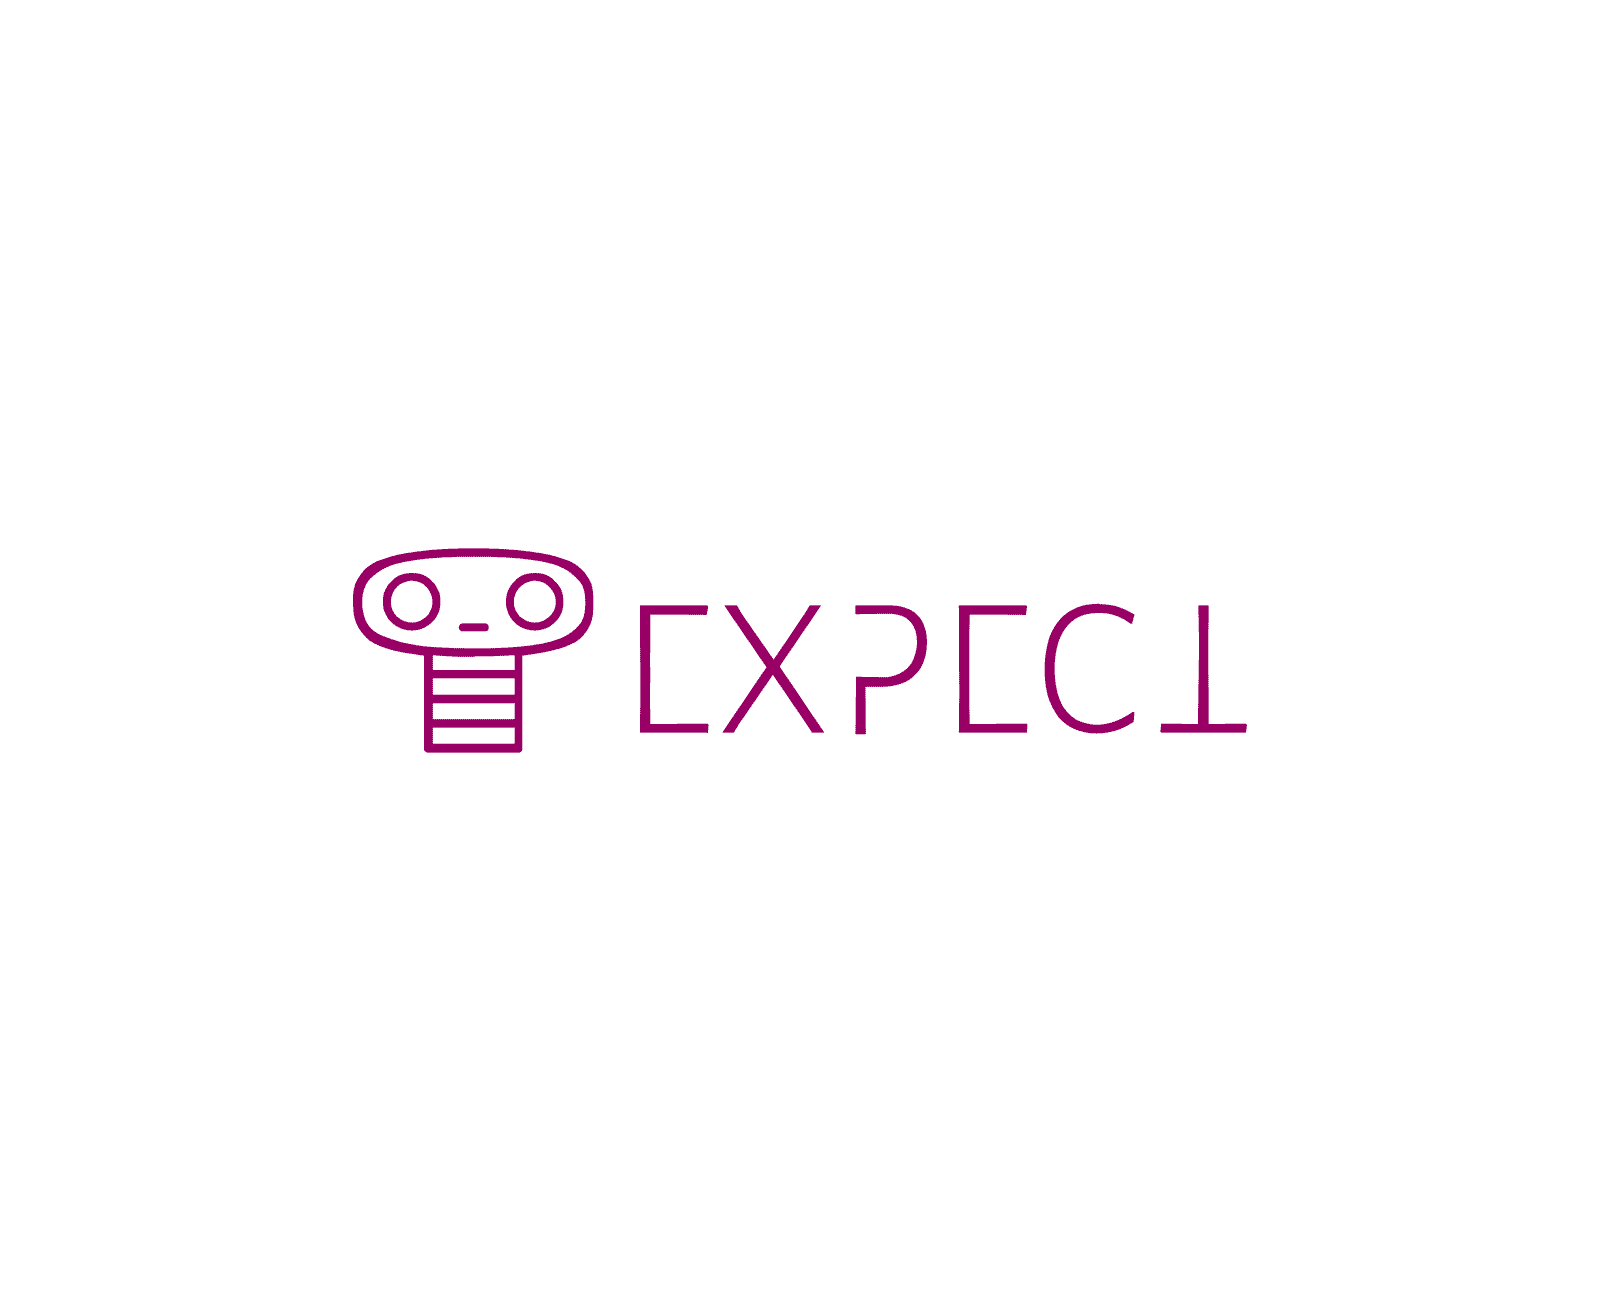 Expect